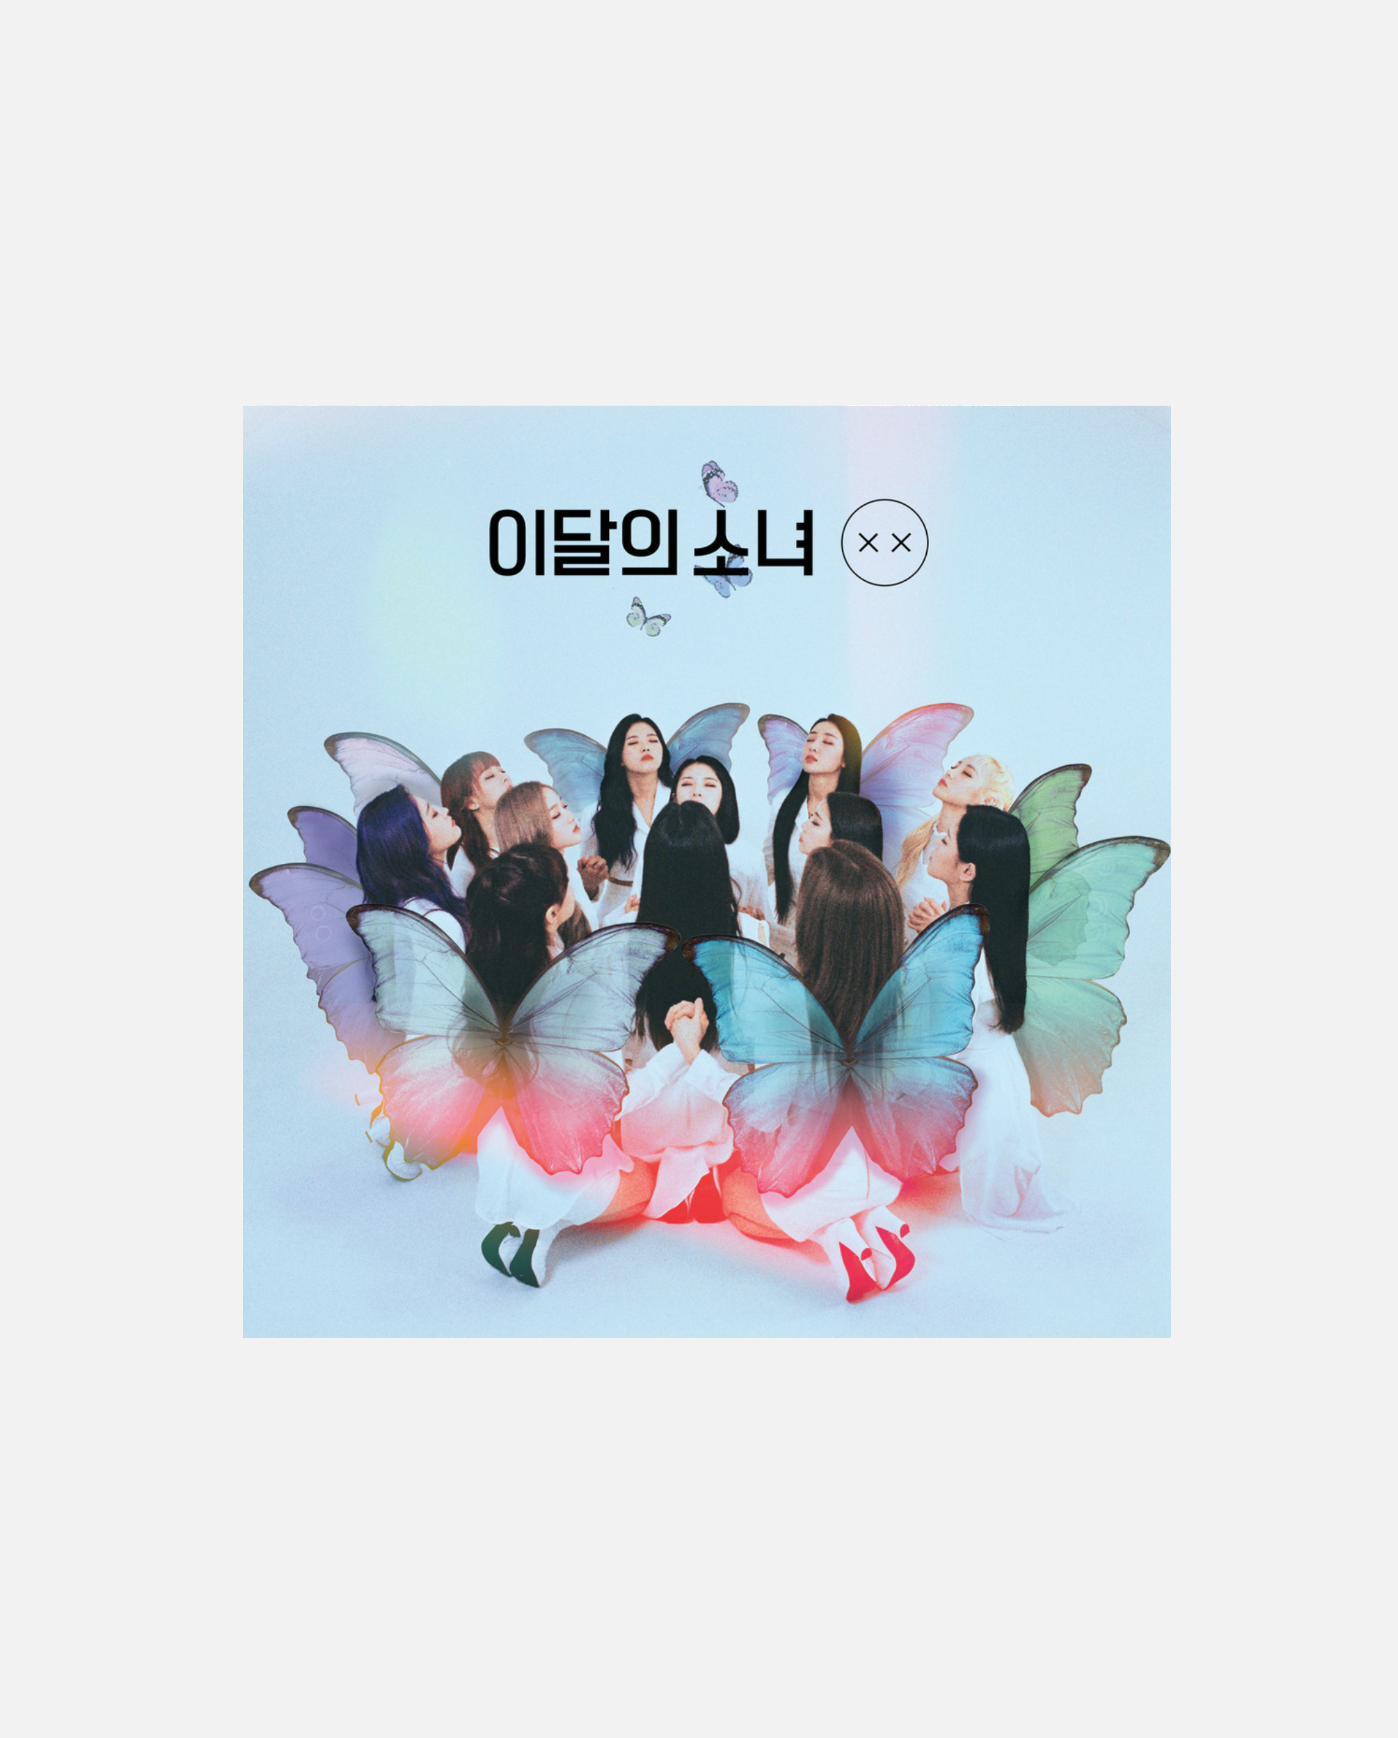 LOONA (This Month’s Girl) - XX Ver. A limited